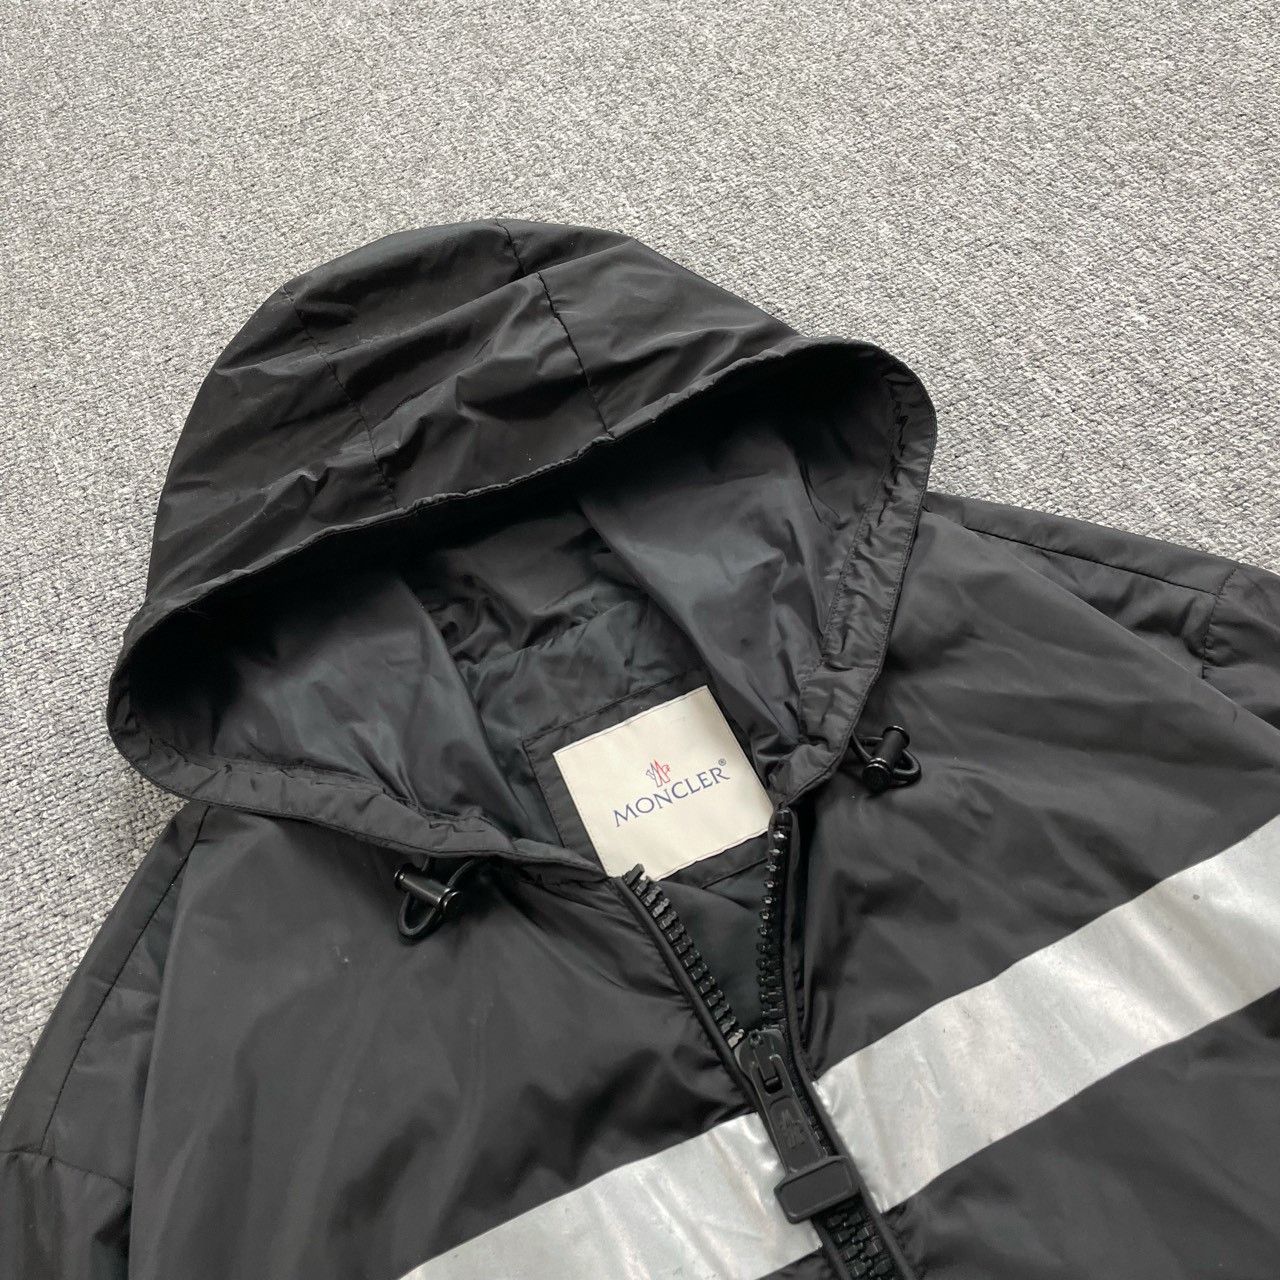 Moncler x Off-white 3M Reflective Zip-up Hoodie Light Jacket - 4